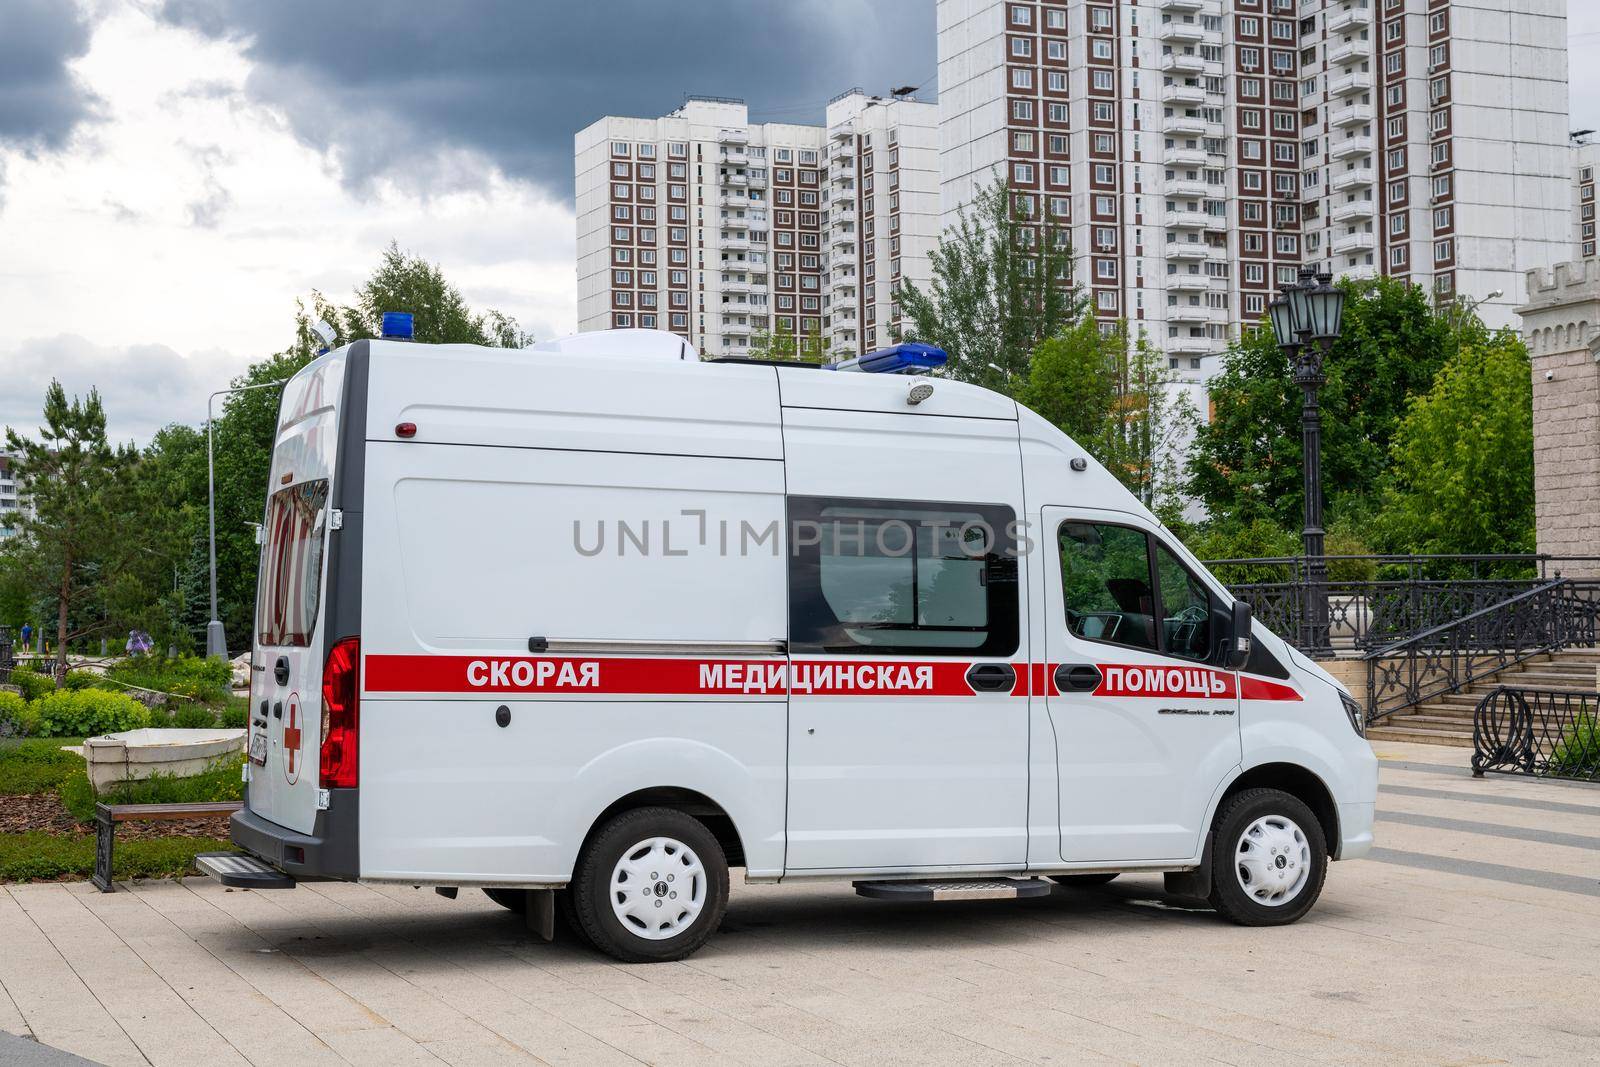 Moscow, Russia - June 17. 2022. An ambulance against the backdrop of residential buildings in Zelenograd